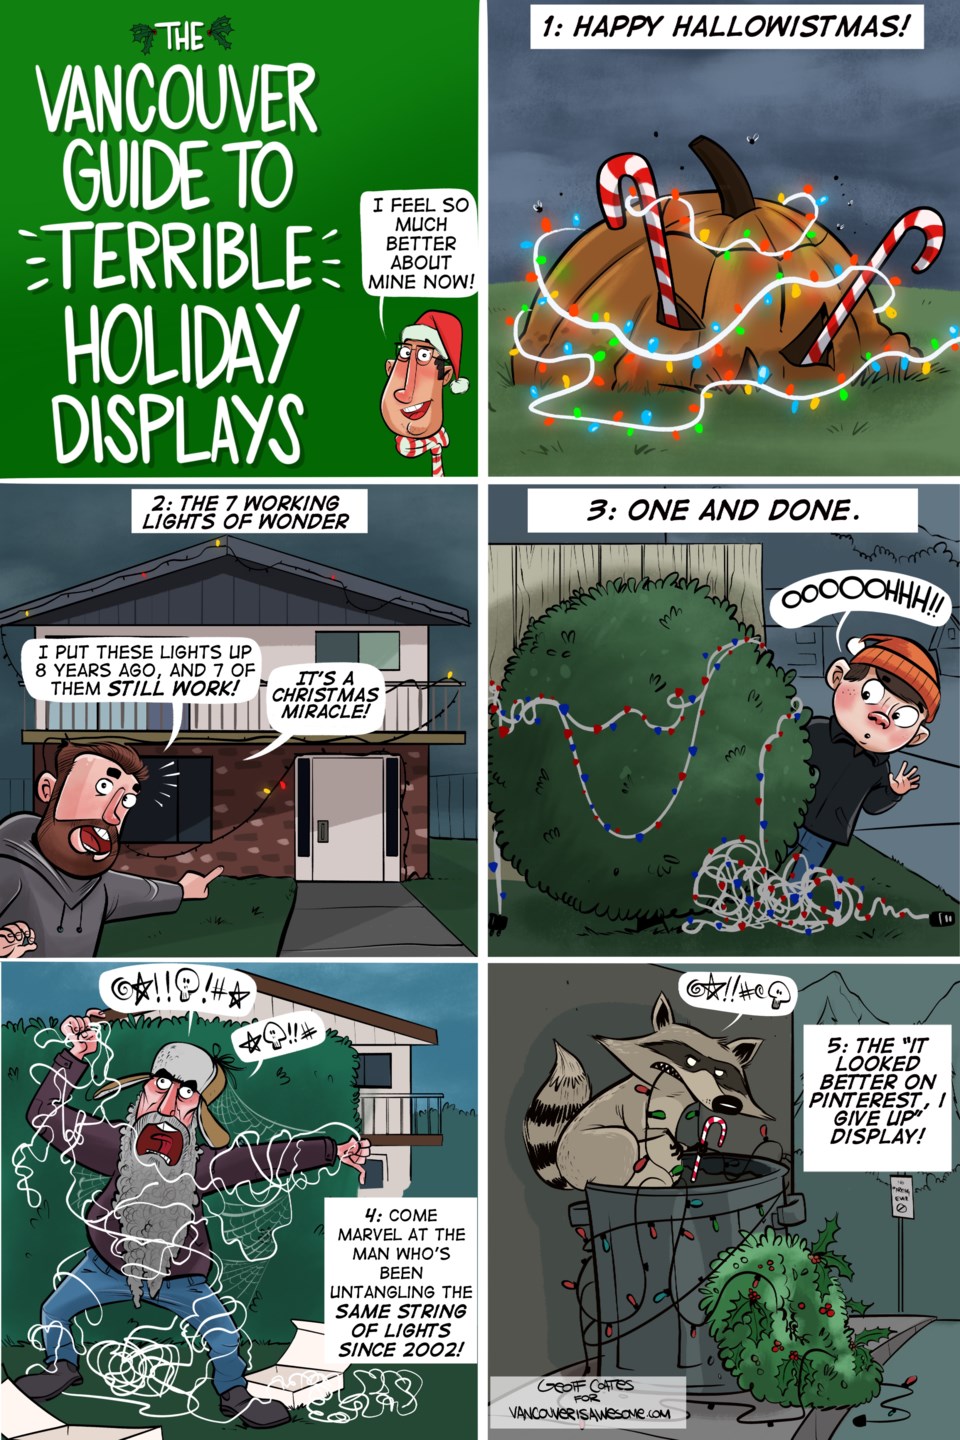 Cartoon: The Vancouver guide to terrible holiday displays - Vancouver Is  Awesome